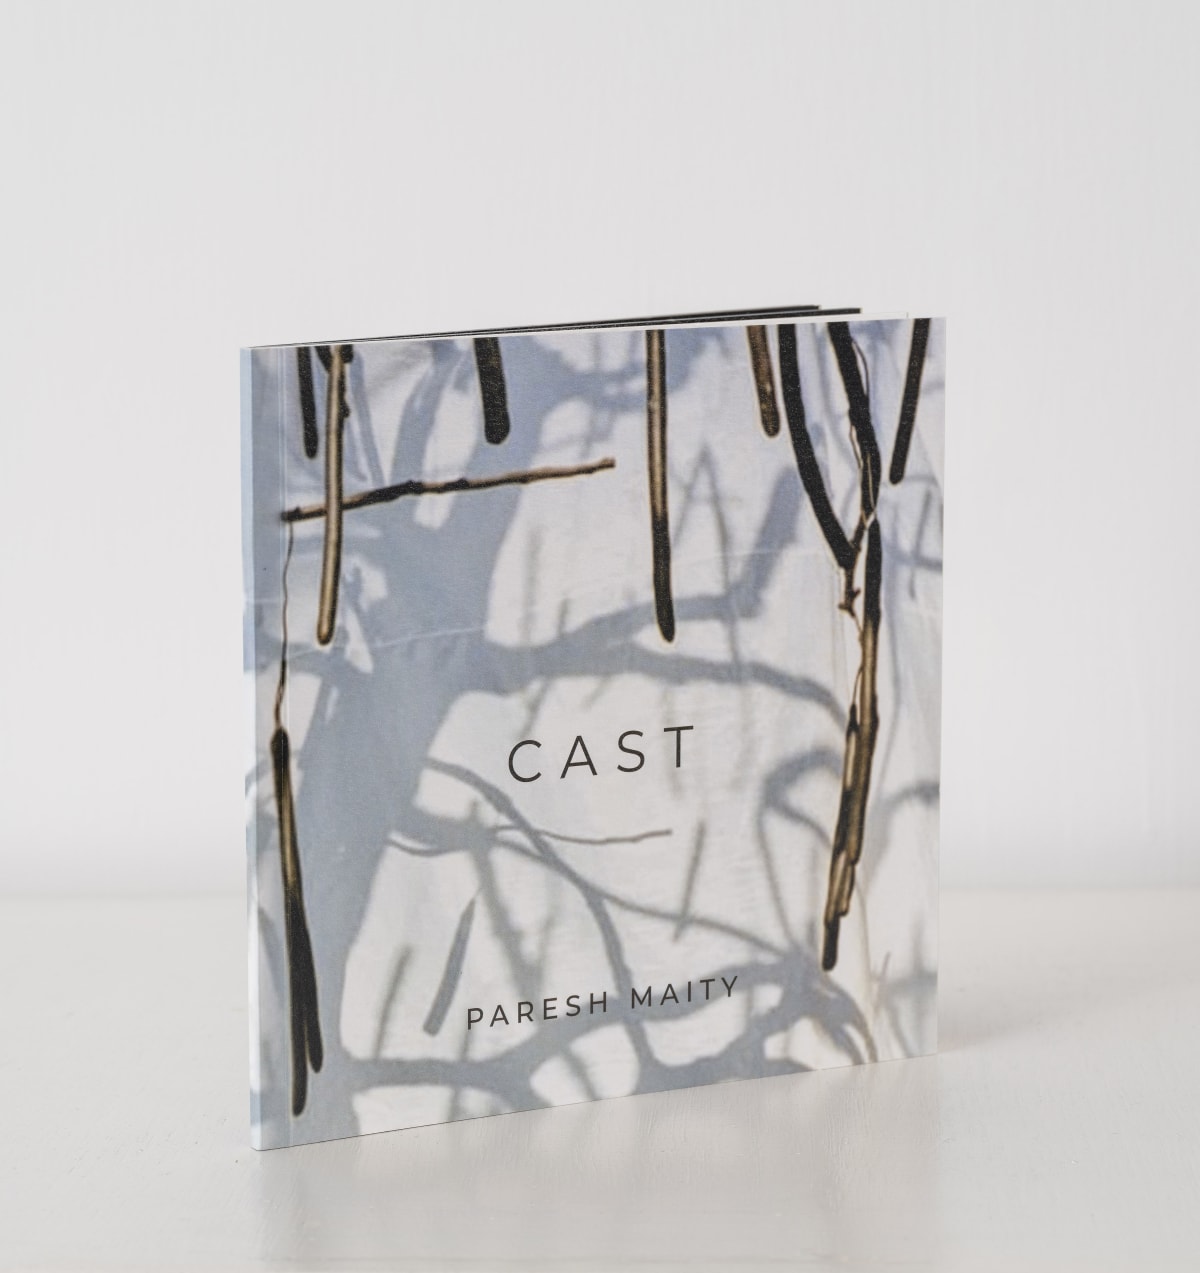 Cast - Paresh Maity, published by Gallery Art Exposure